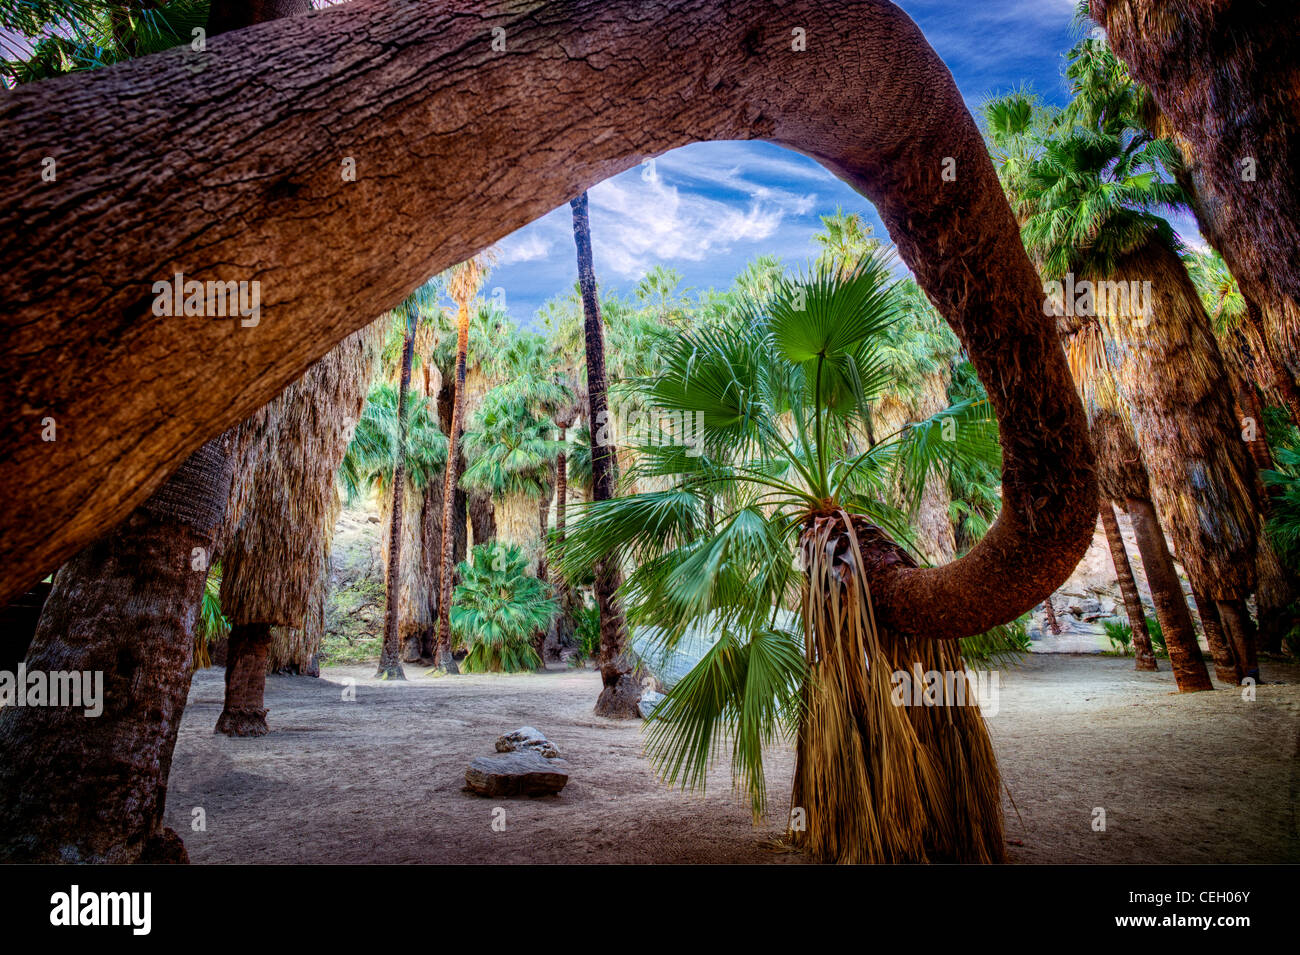 Twisted palm tree. Palm Canyon. Indian Canyons. Palm Springs, California. Stock Photo